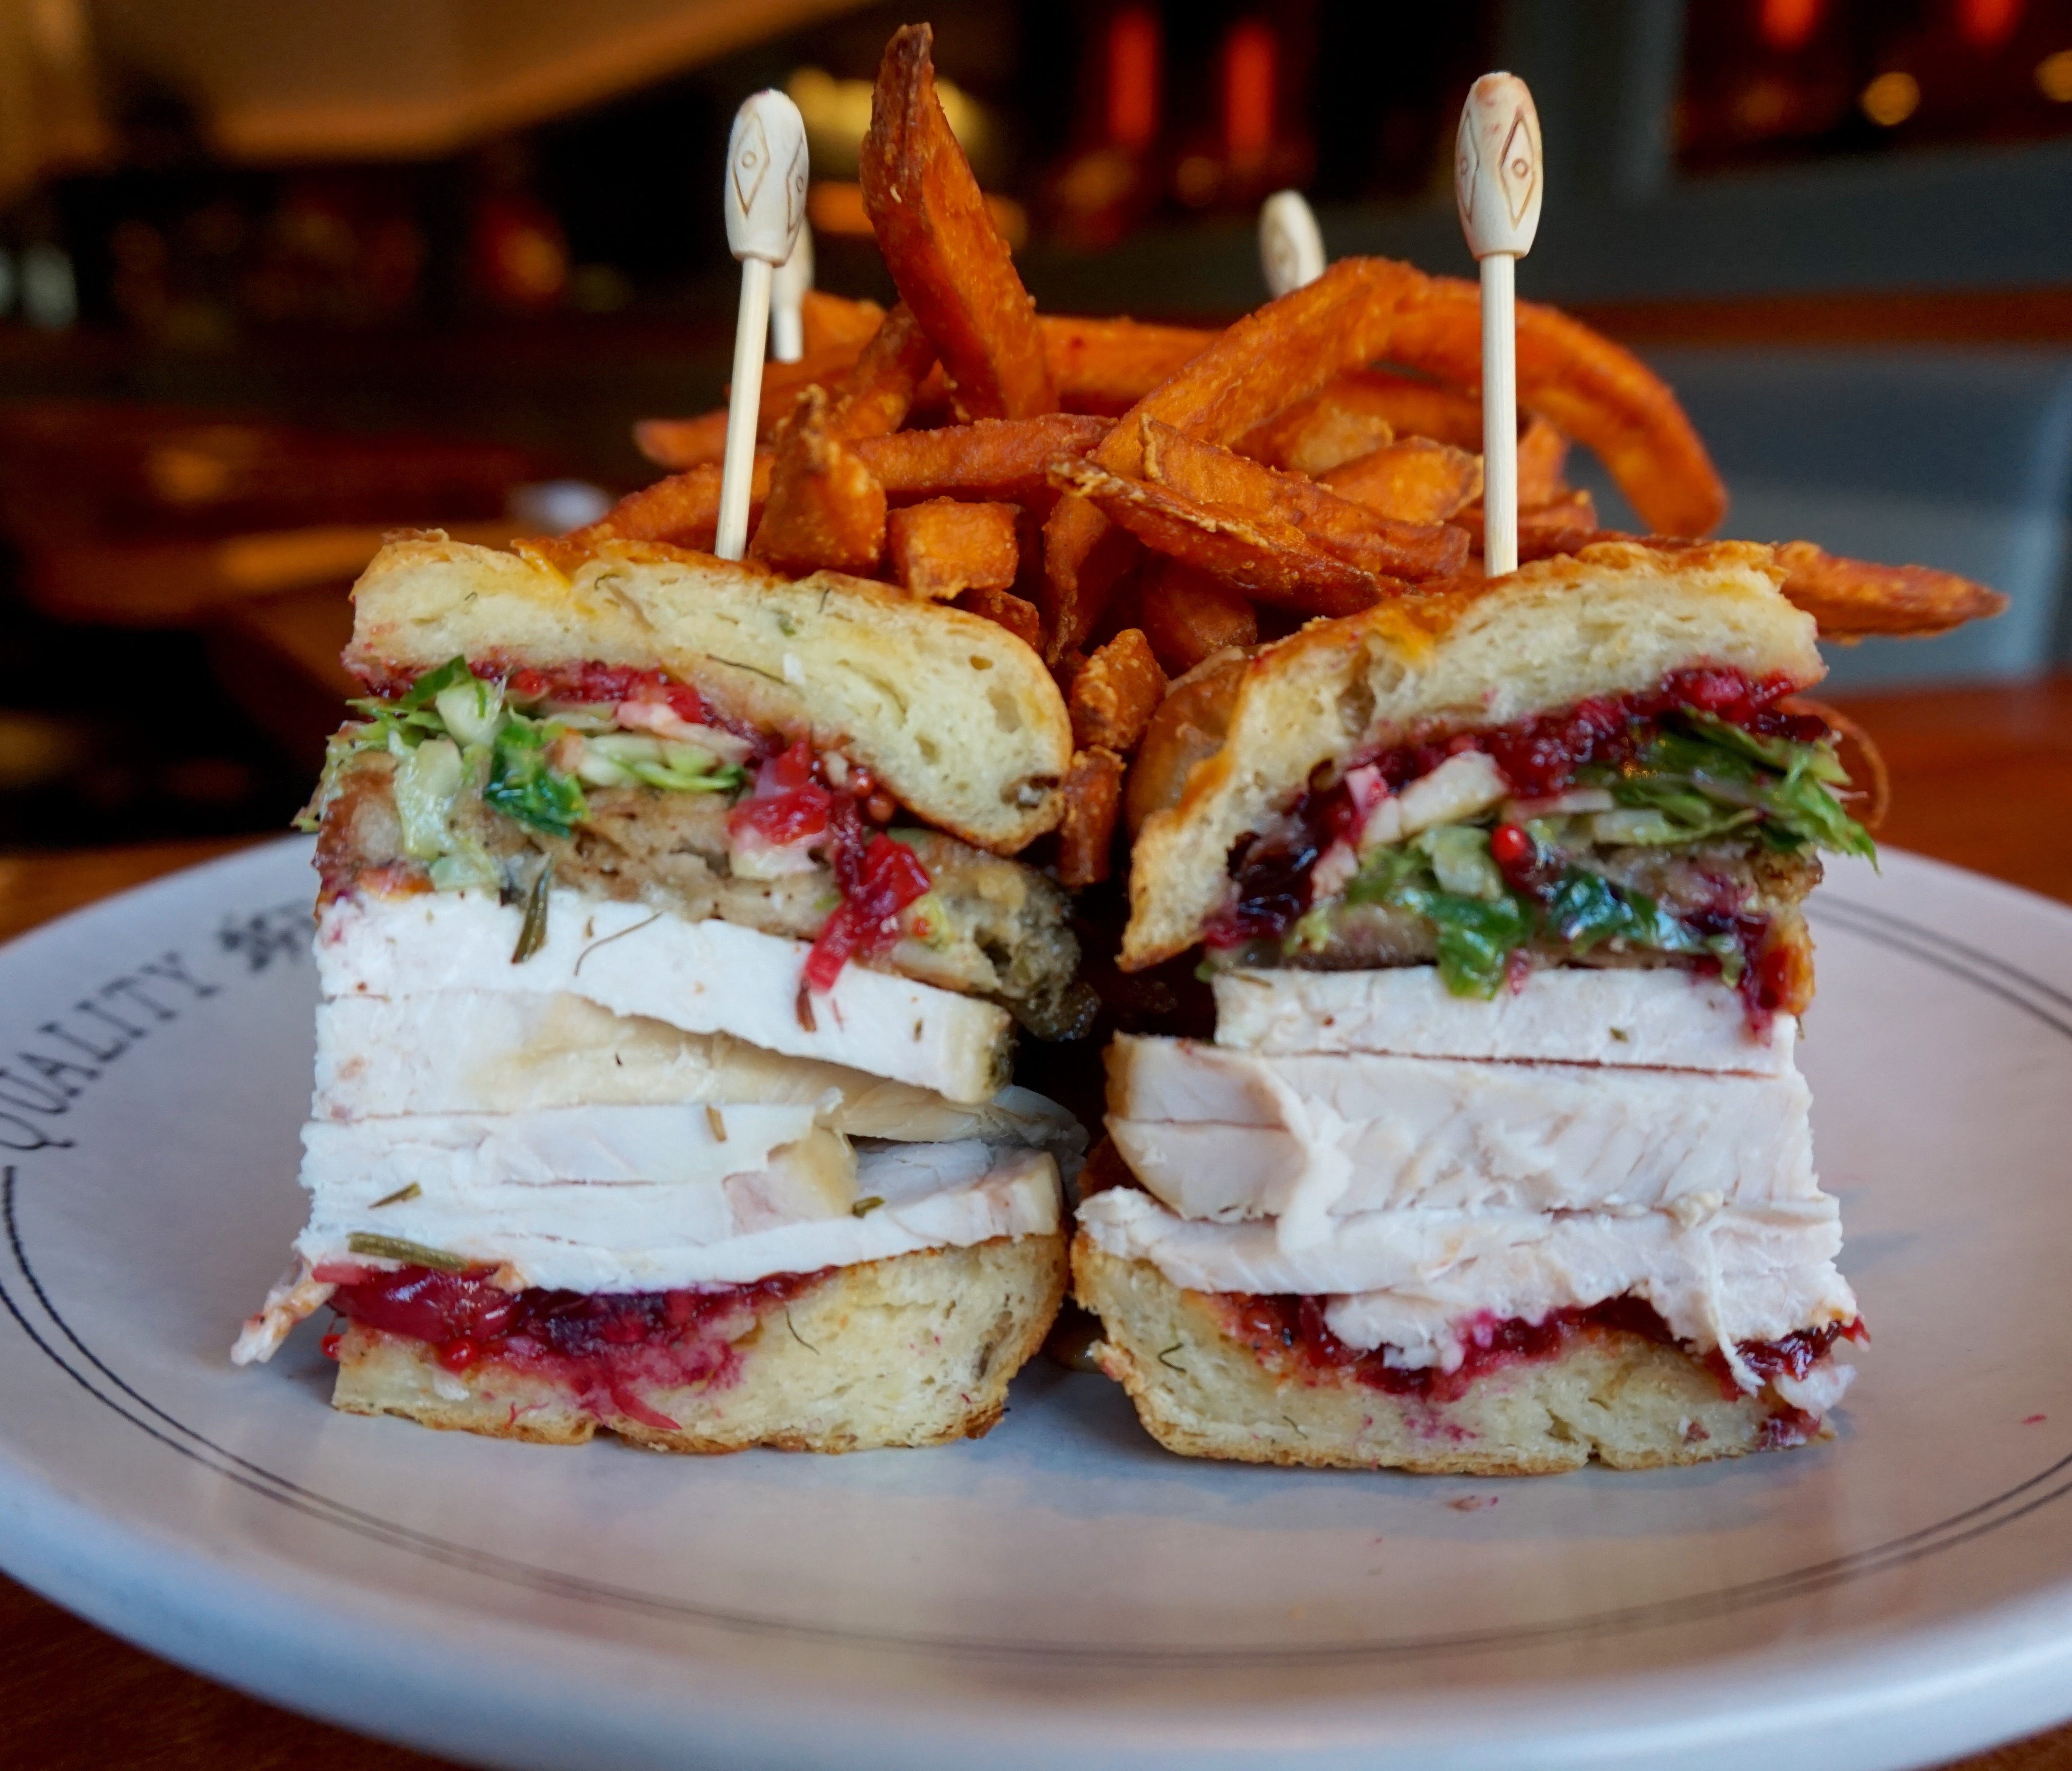 In New York City, Quality Eats offers the Roasted Turkey Monkey Bread Sandwich, with layers of roasted turkey, a Faicco's sausage stuffing and cranberry mostarda, on house monkey bread, November 23 through December 1.